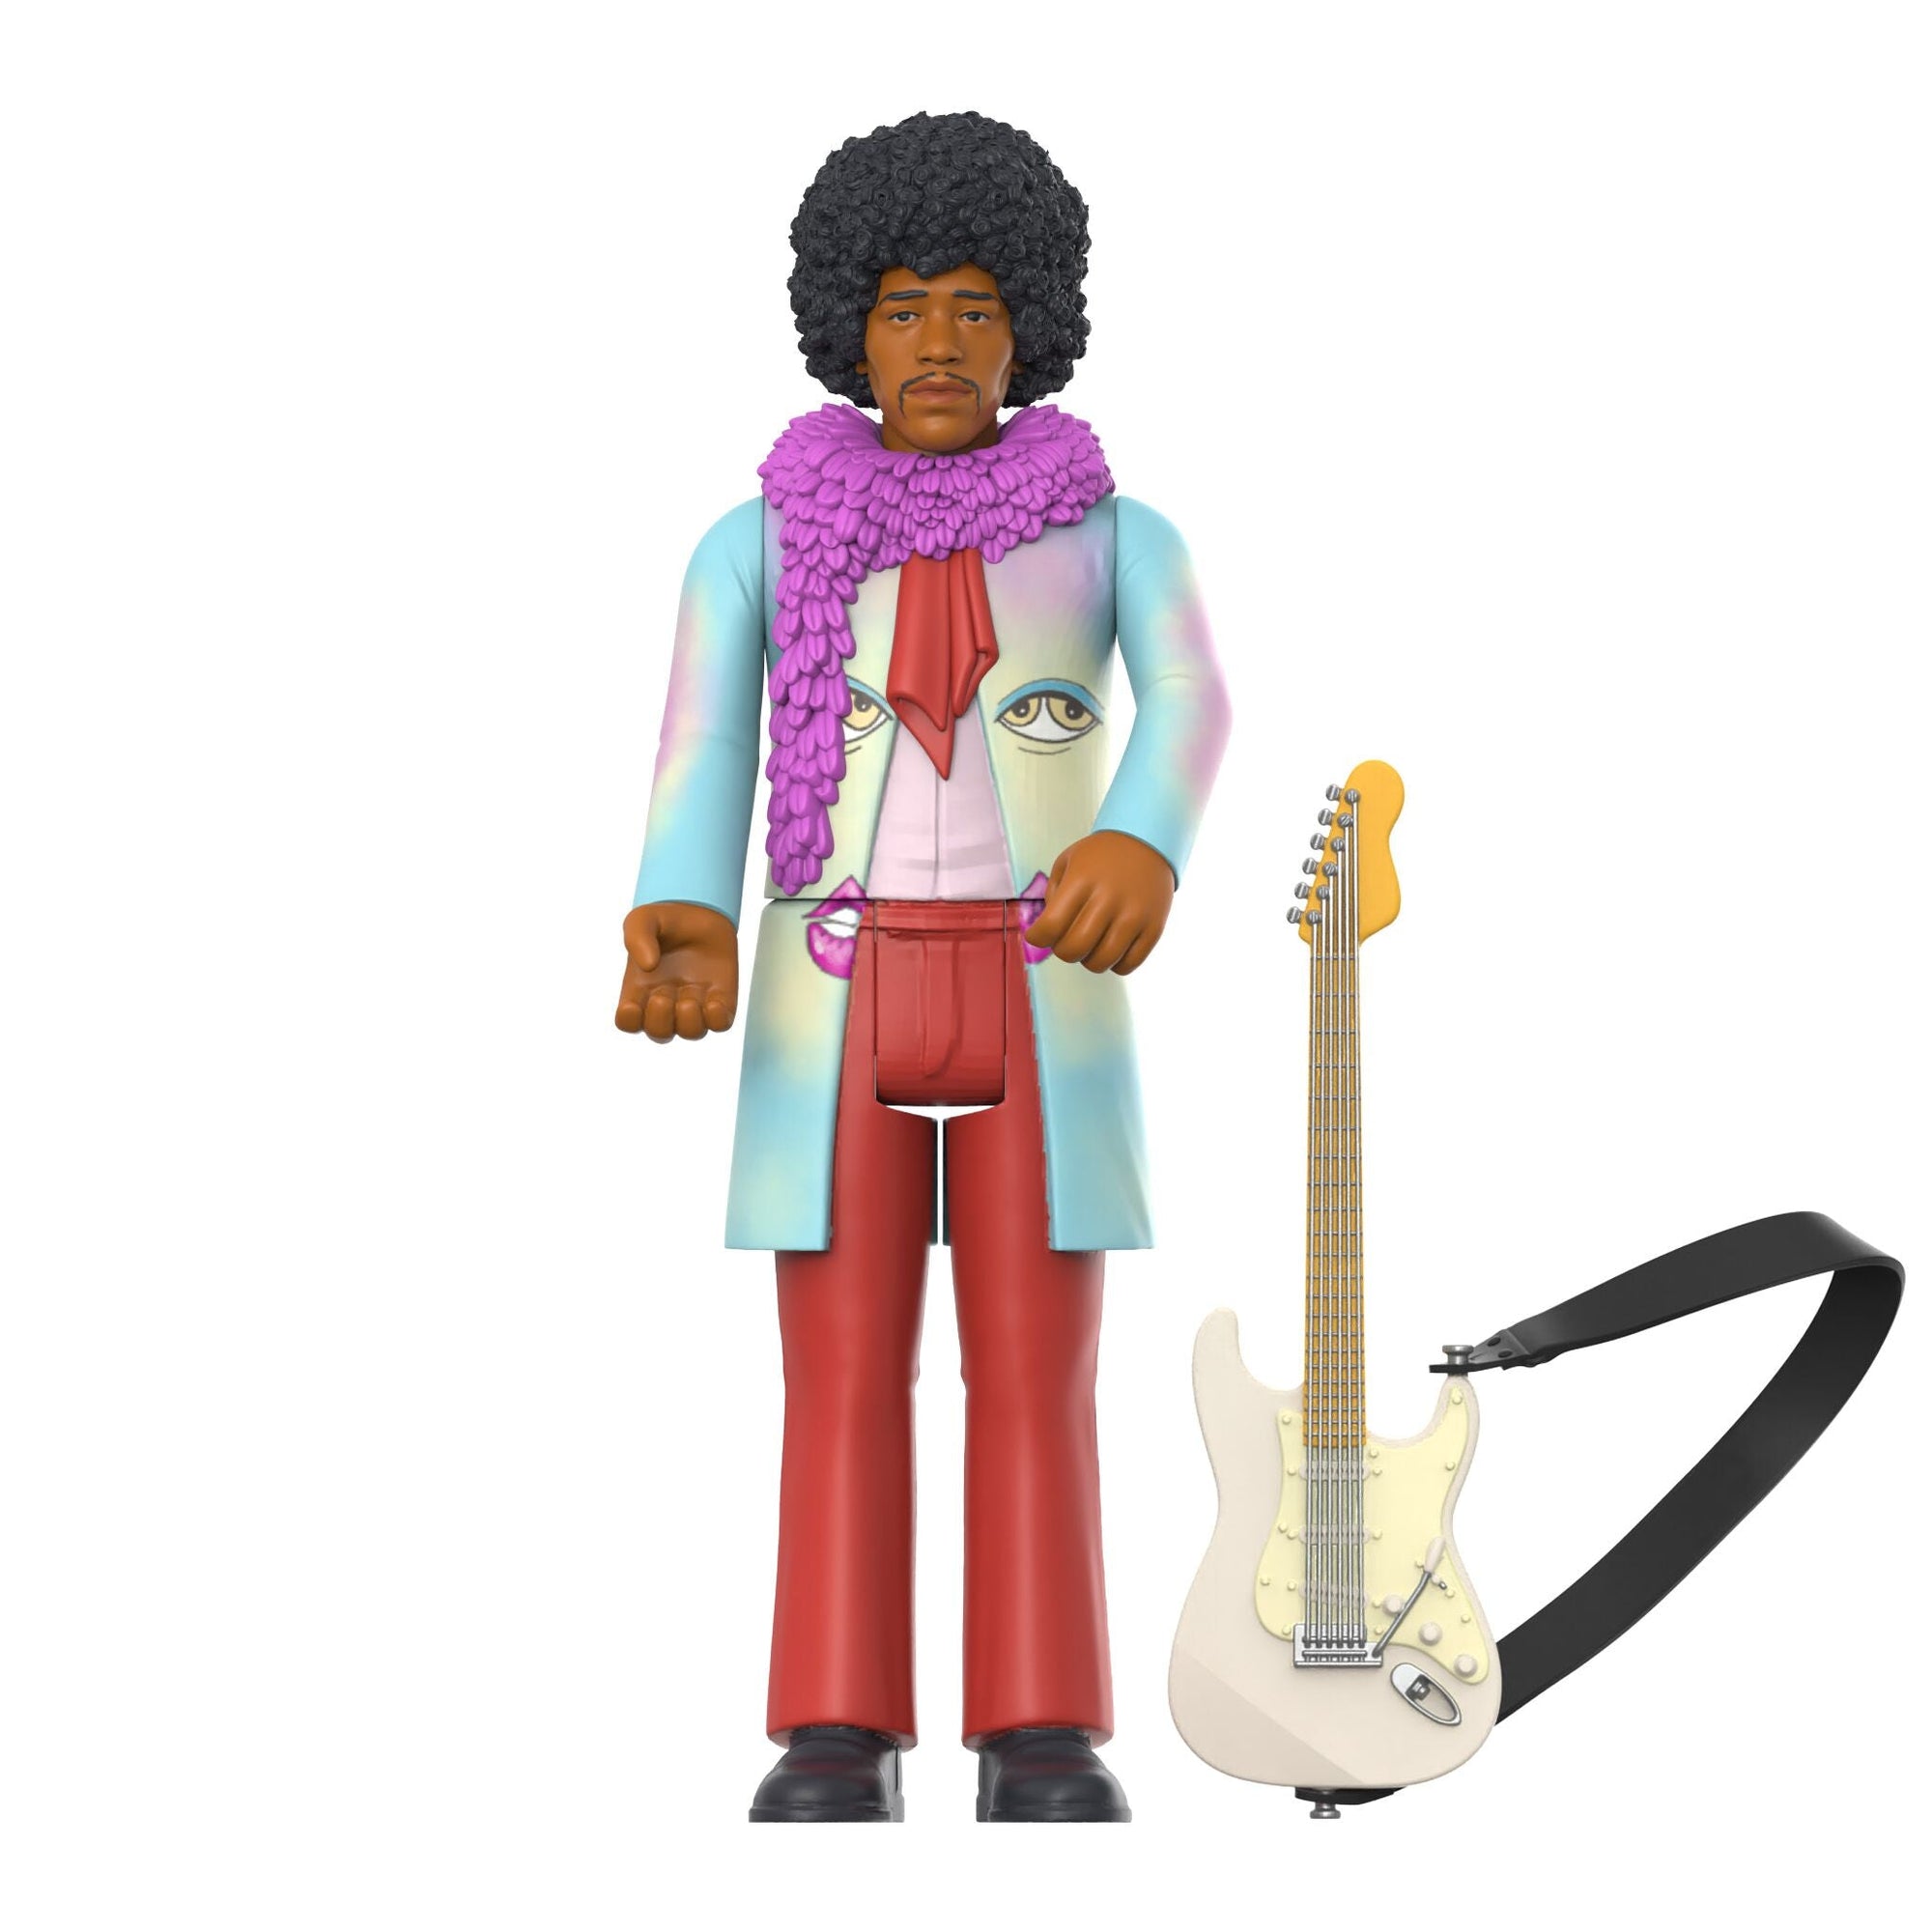 Jimi Hendrix (Are You Experienced) - Jimi Hendrix ReAction Figure by Super7 *PUNCHED